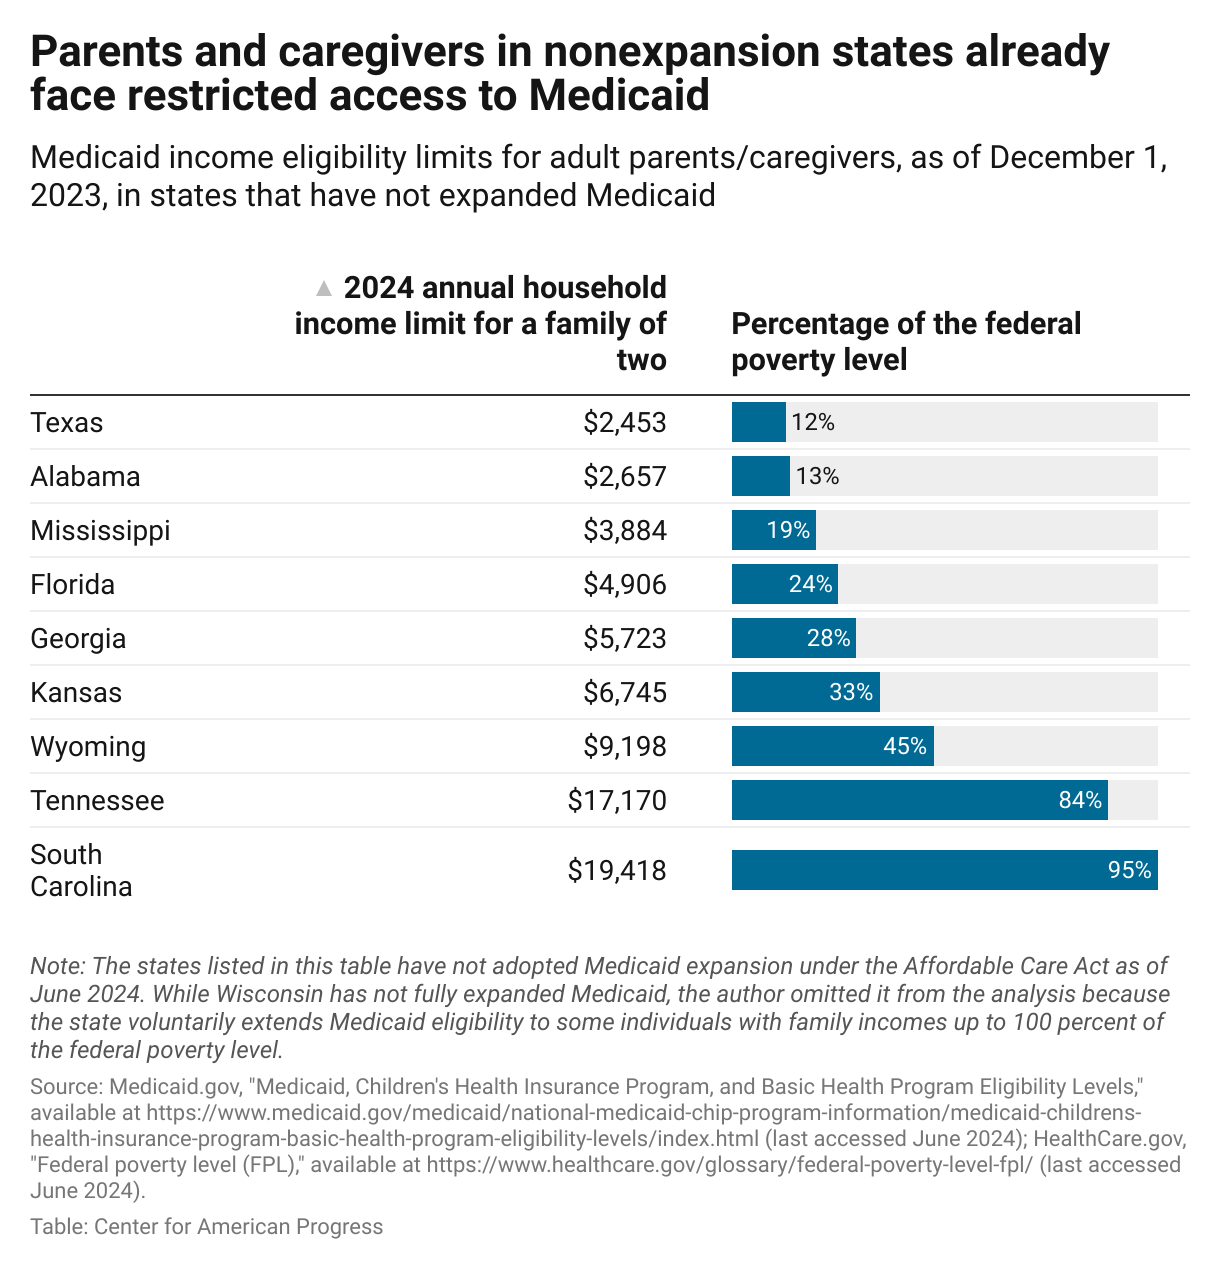 Table that identifies income eligibility limits (percentage of the federal poverty level and 2024 annual household income) for adult parent/caregivers for states that have not adopted the ACA's Medicaid expansion. Eligibility limits for a family of two range from $2,452.80 in Texas to $19,418 in South Carolina.